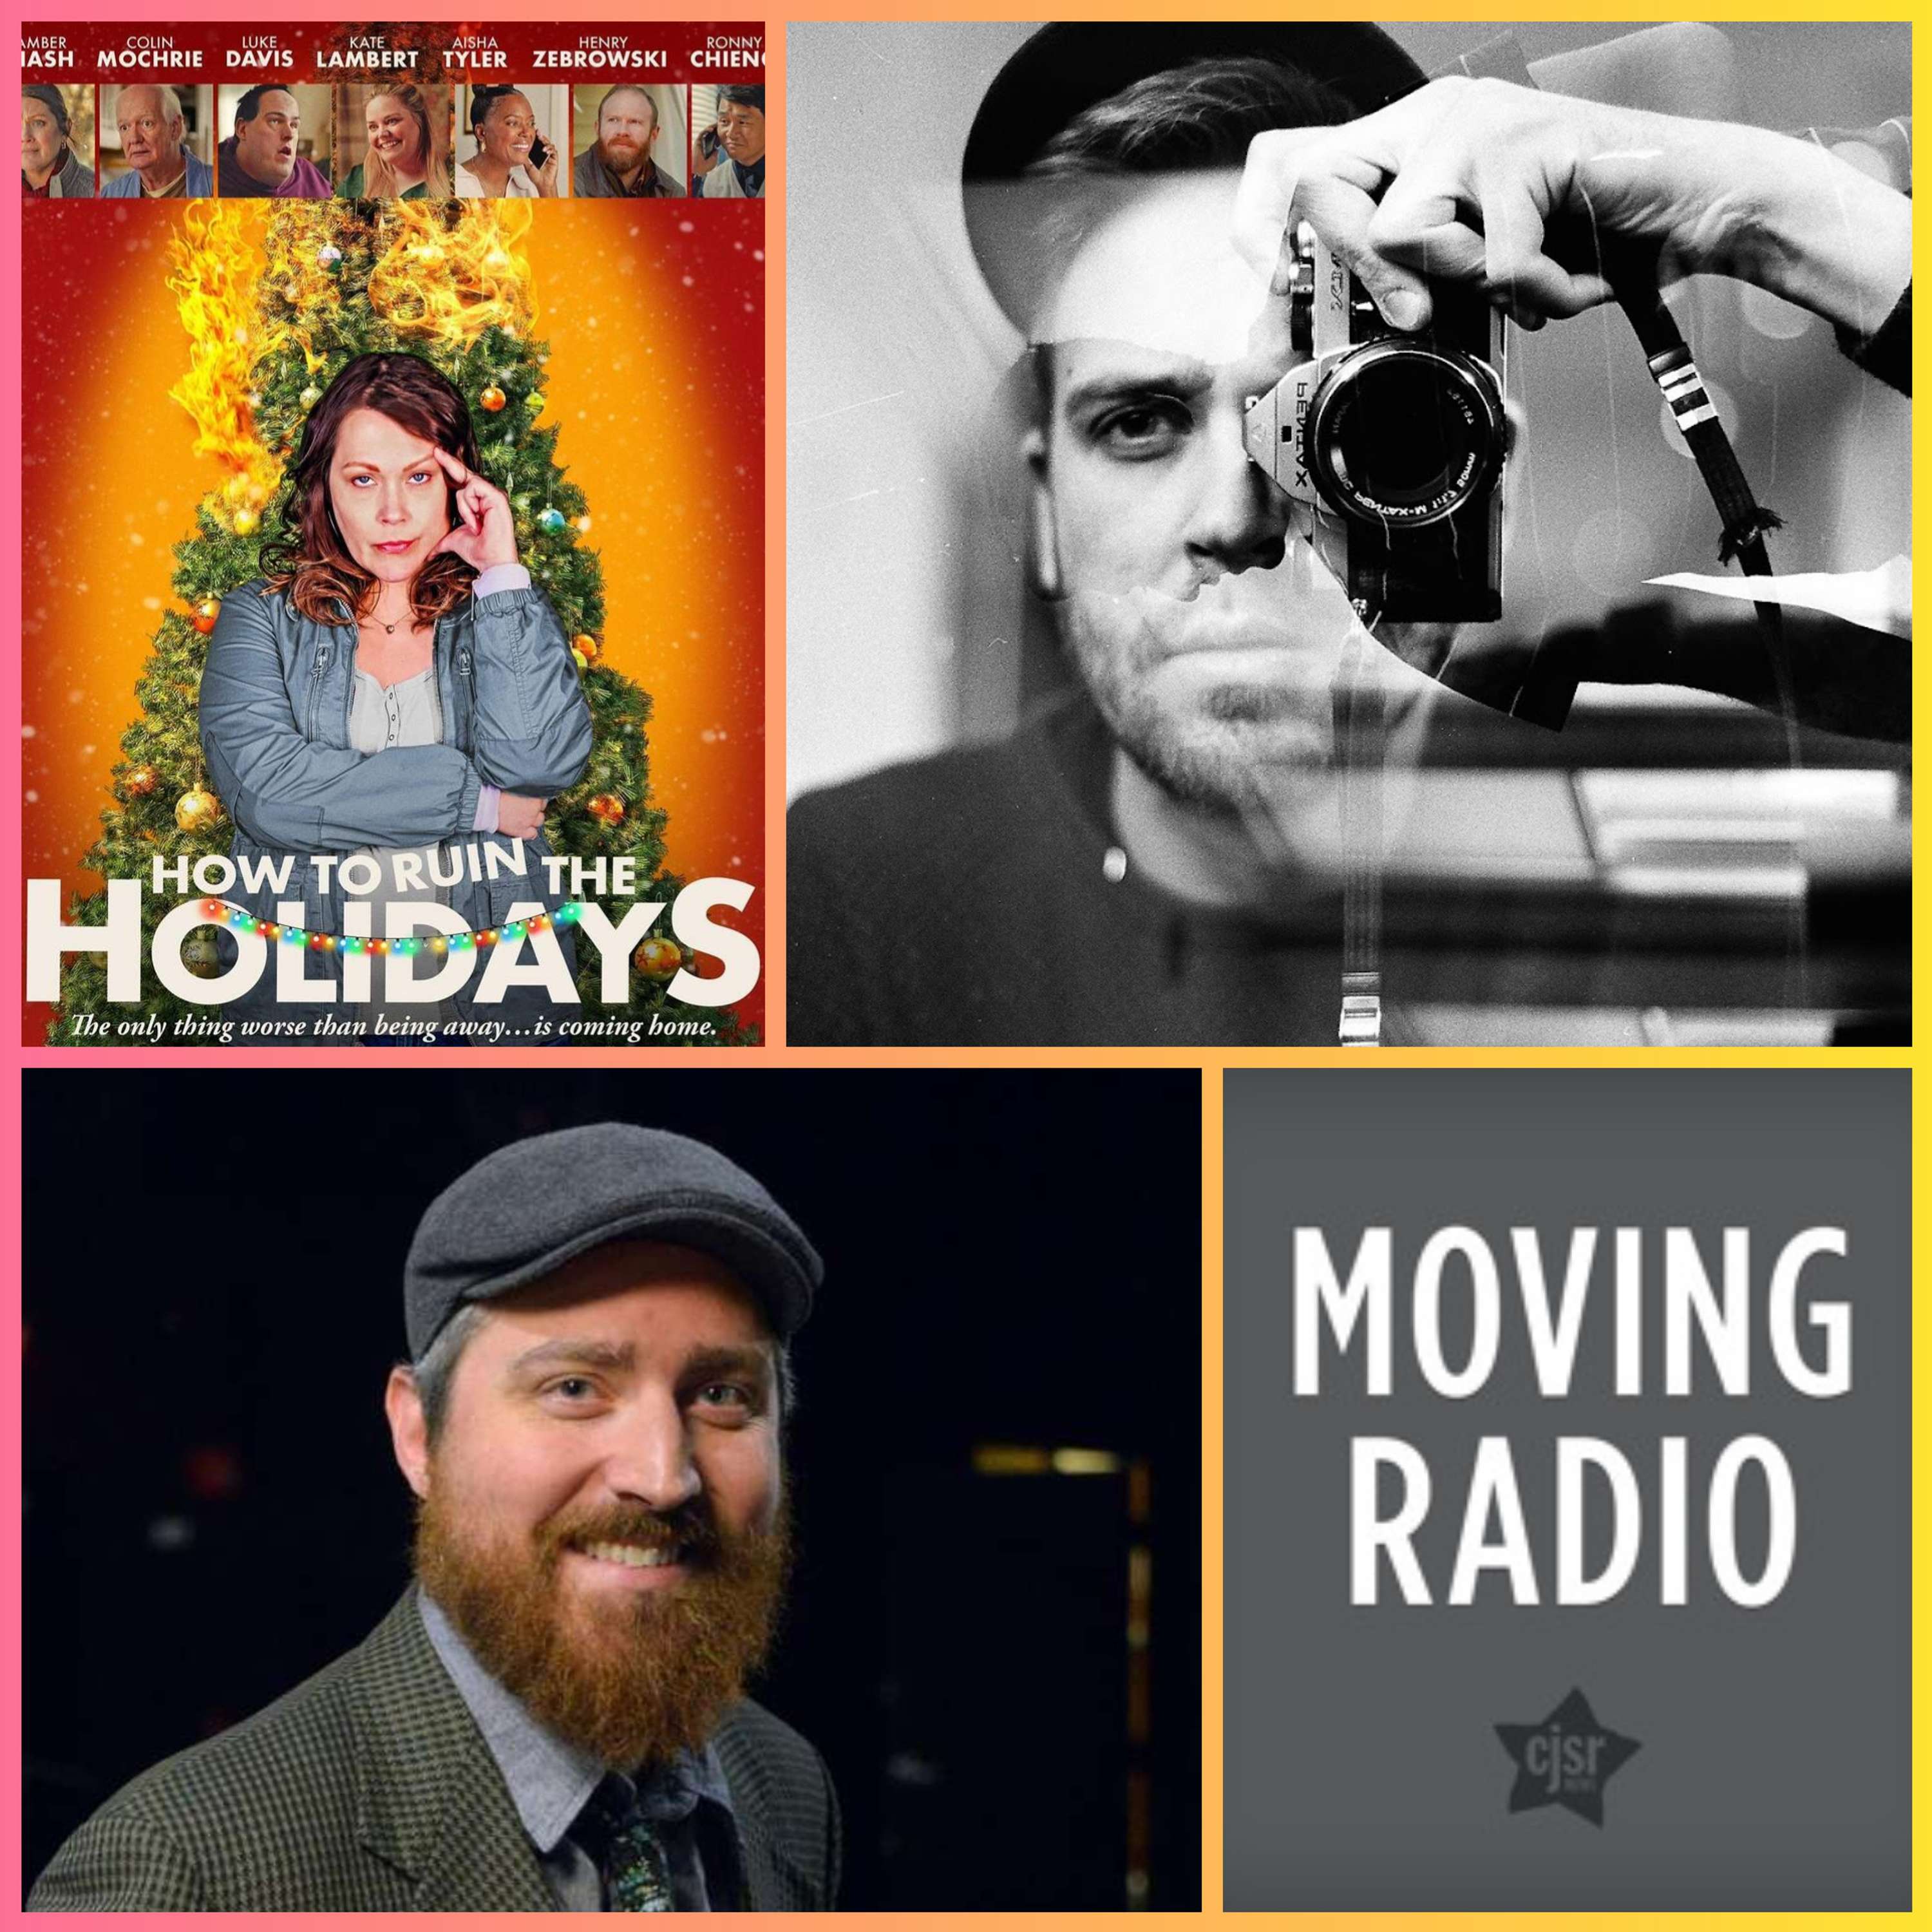 HOW TO RUIN THE HOLIDAYS-Kevin Gillese (writer) and Arlen Konopaki (director) Interview